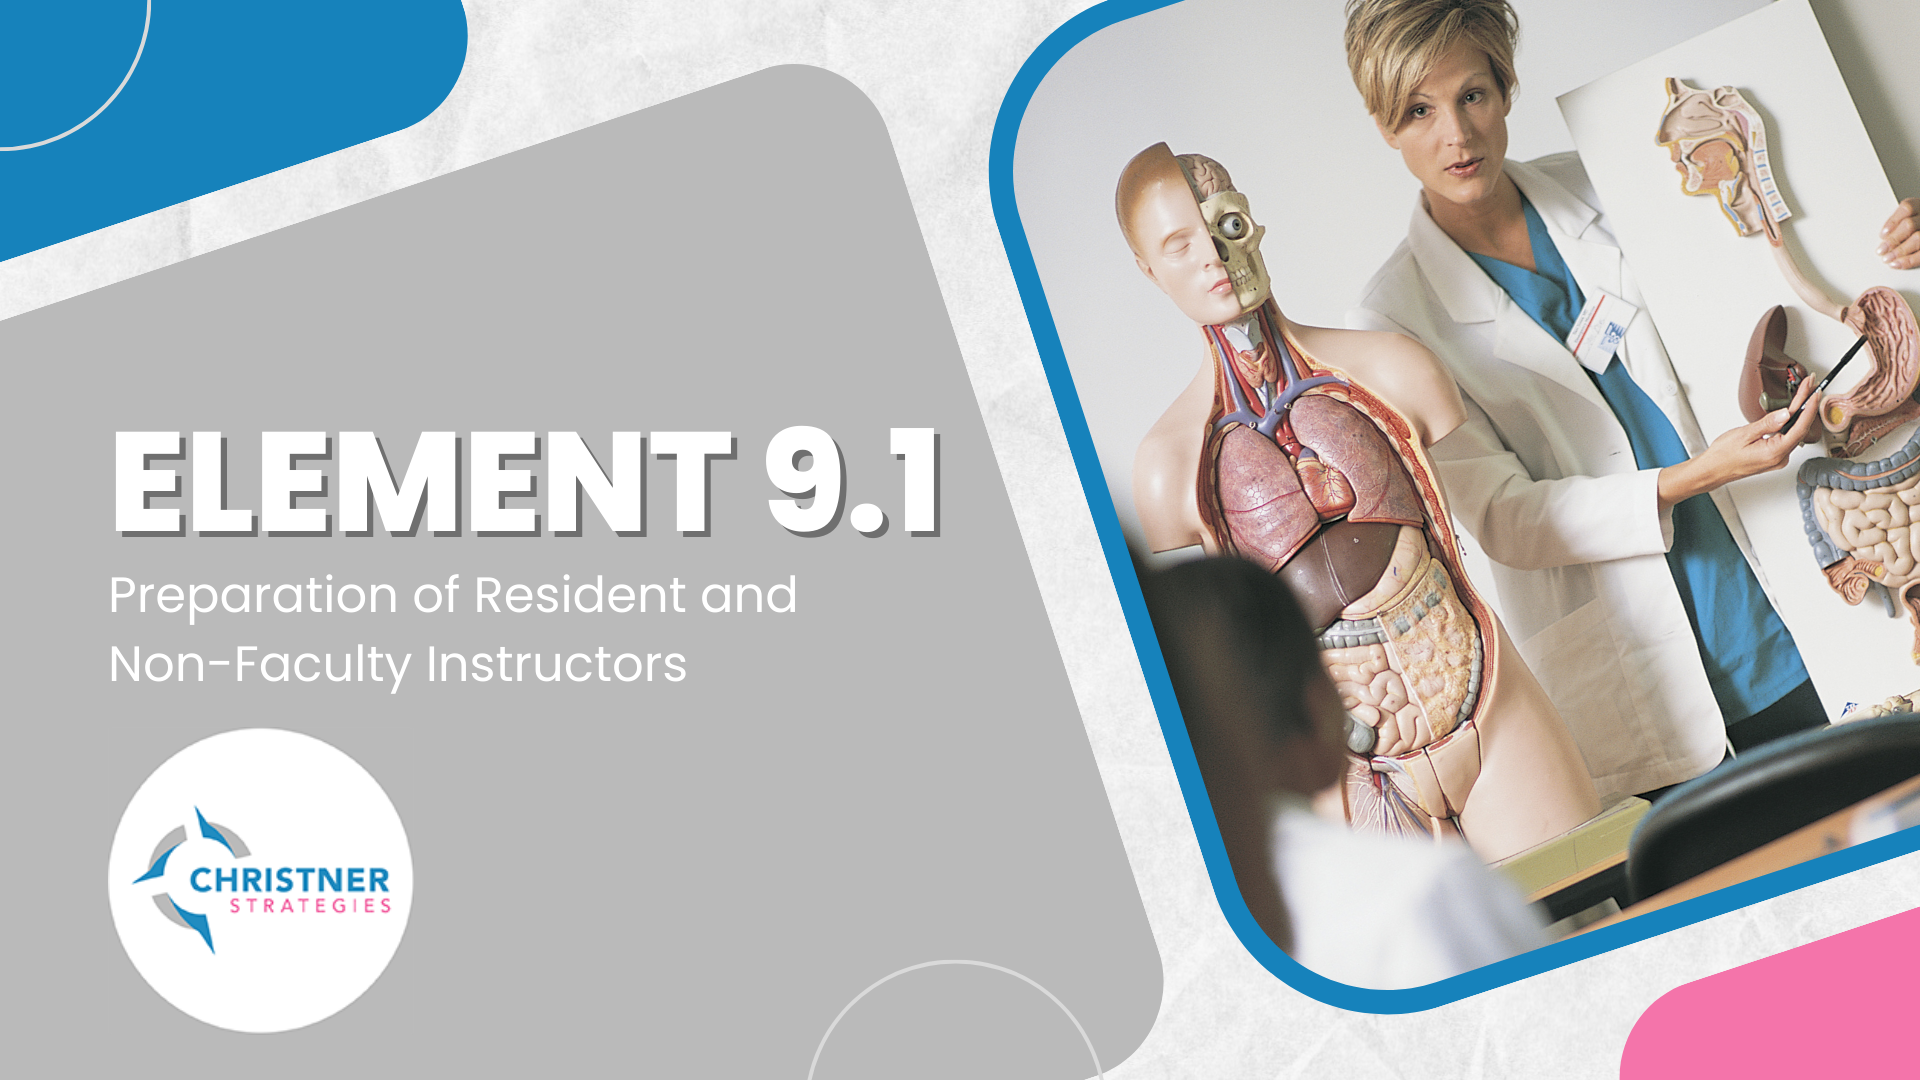 LCME Element 9.1 - Preparation of Resident and Non-Faculty Instructors